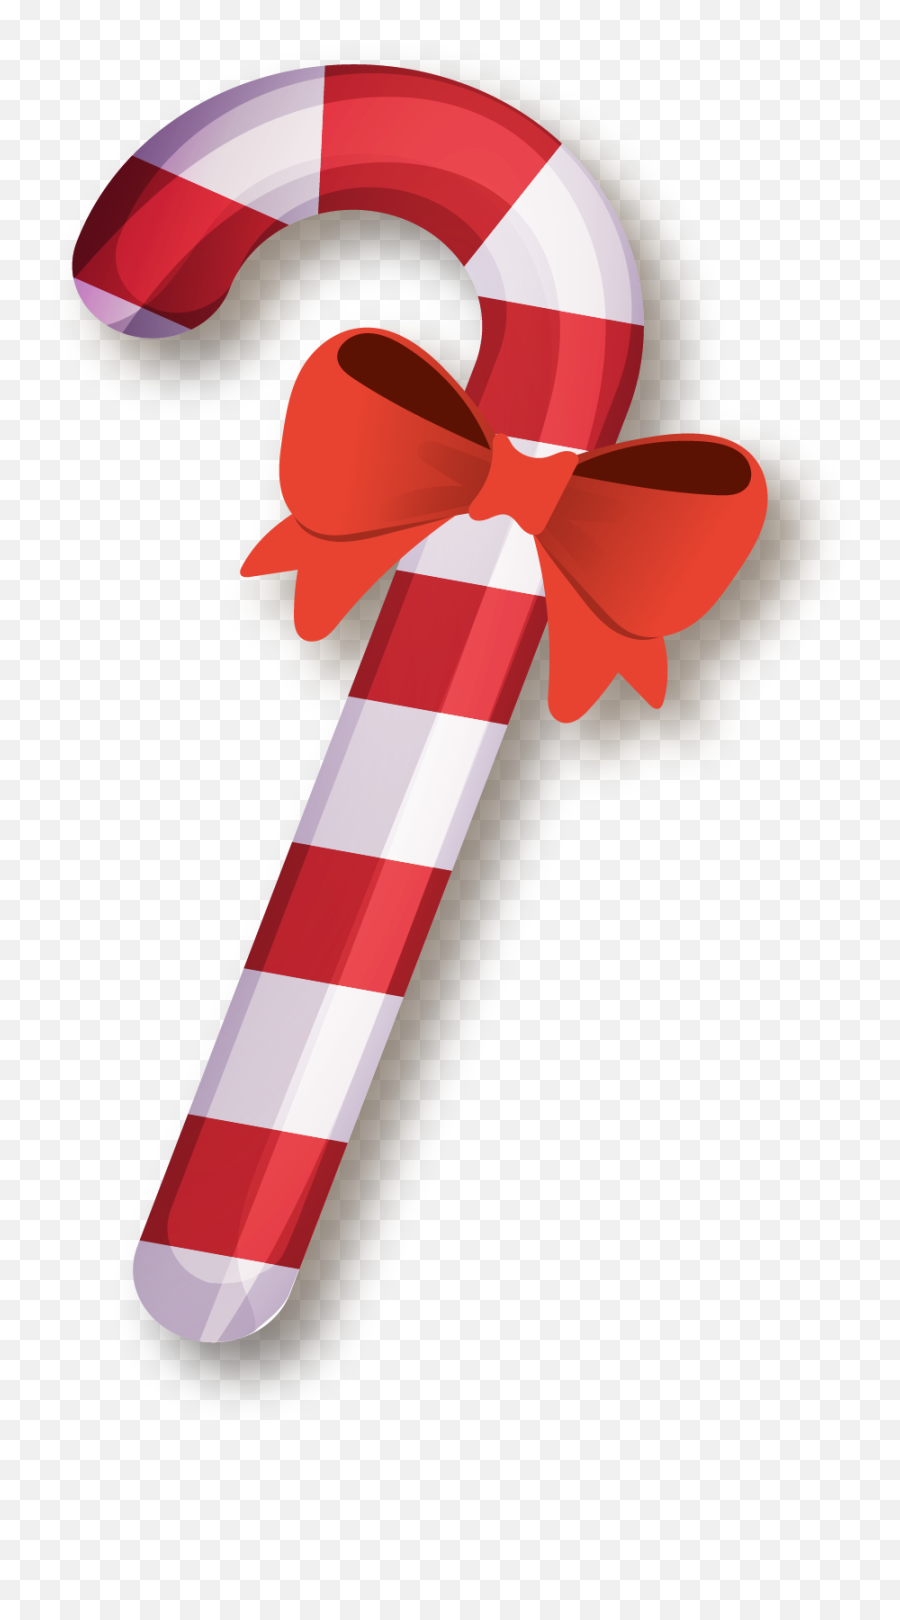 Candy Cane Christmas Sugar - Christmas Candy Cane Png,Candy Cane Transparent Background